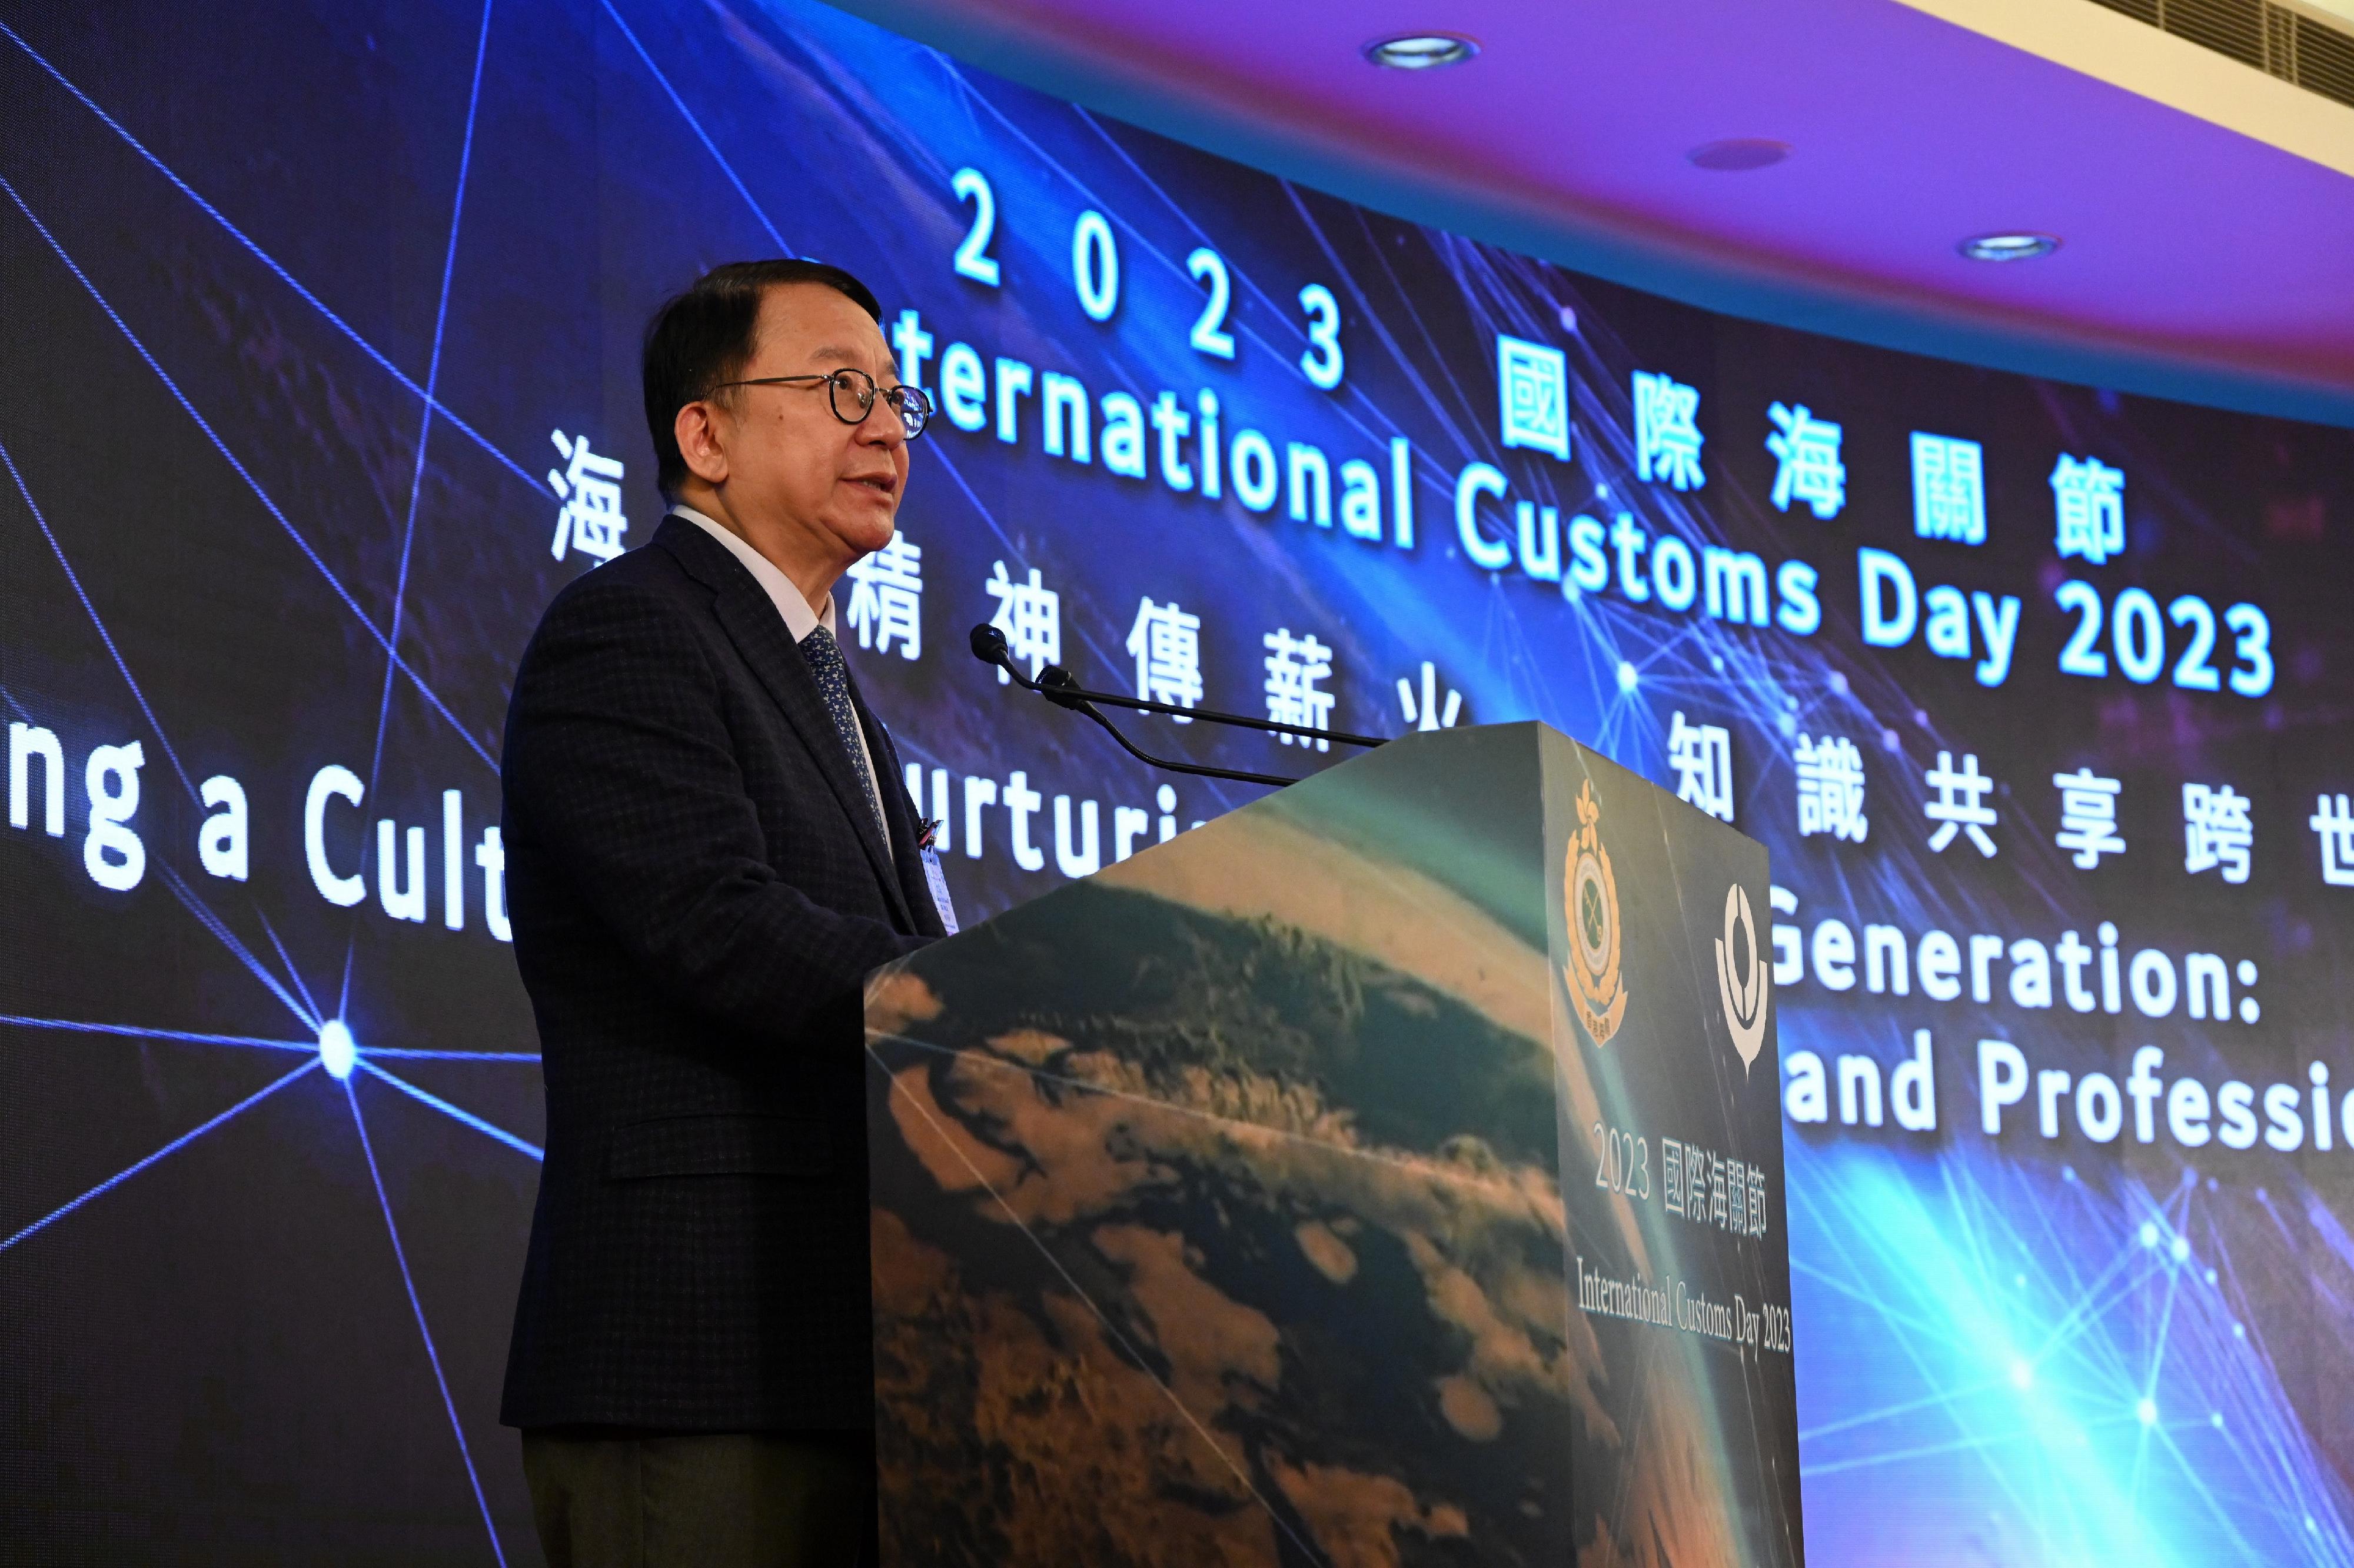 Officiated by the Chief Secretary for Administration, Mr Chan Kwok-ki, and the Commissioner of Customs and Excise, Ms Louise Ho, a ceremony in celebration of the International Customs Day 2023 was held by Hong Kong Customs at the Customs Headquarters Building today (February 2). Photo shows the Chief Secretary for Administration, Mr Chan Kwok-ki, speaking at the celebration ceremony.